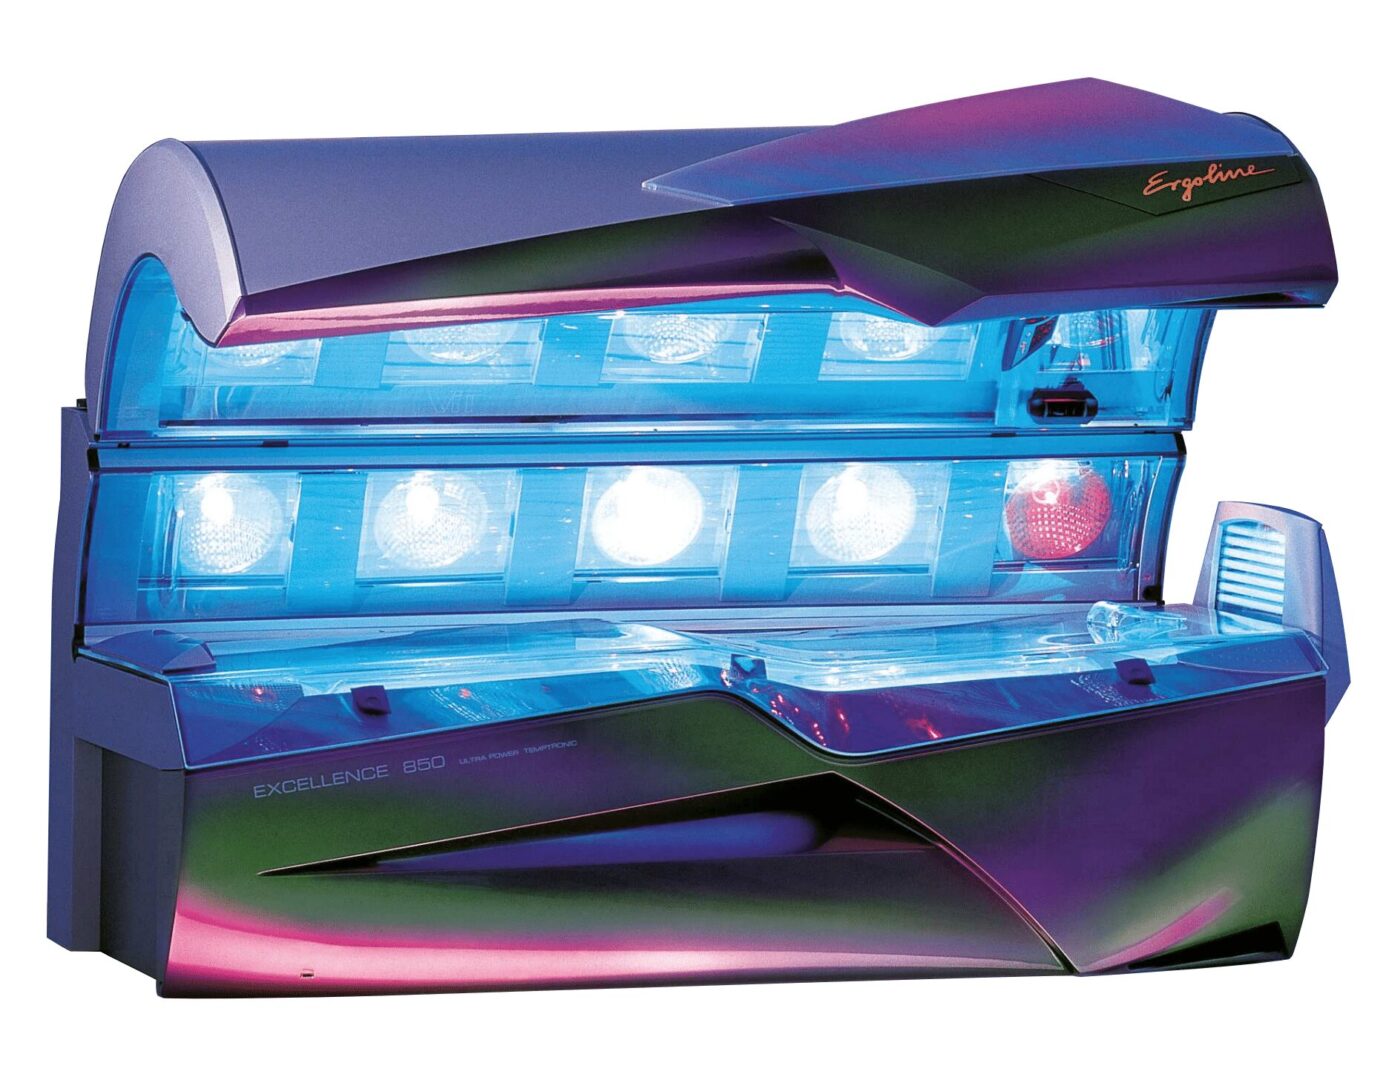 A picture of an open tanning bed with lights on.